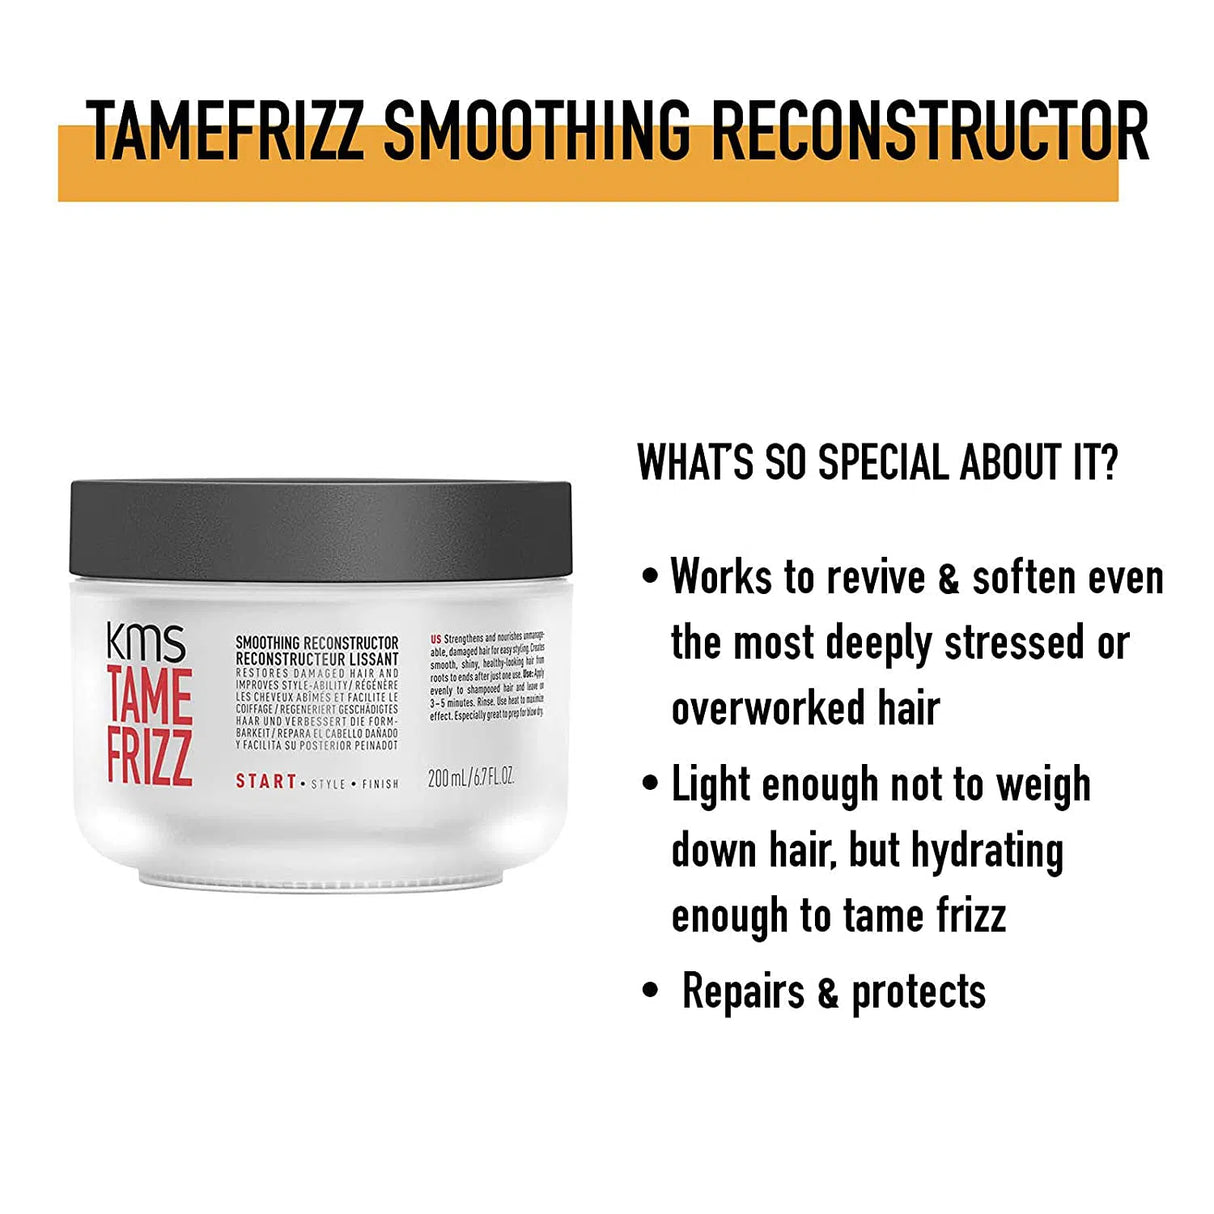 Tamefrizz Smoothing Reconstructor